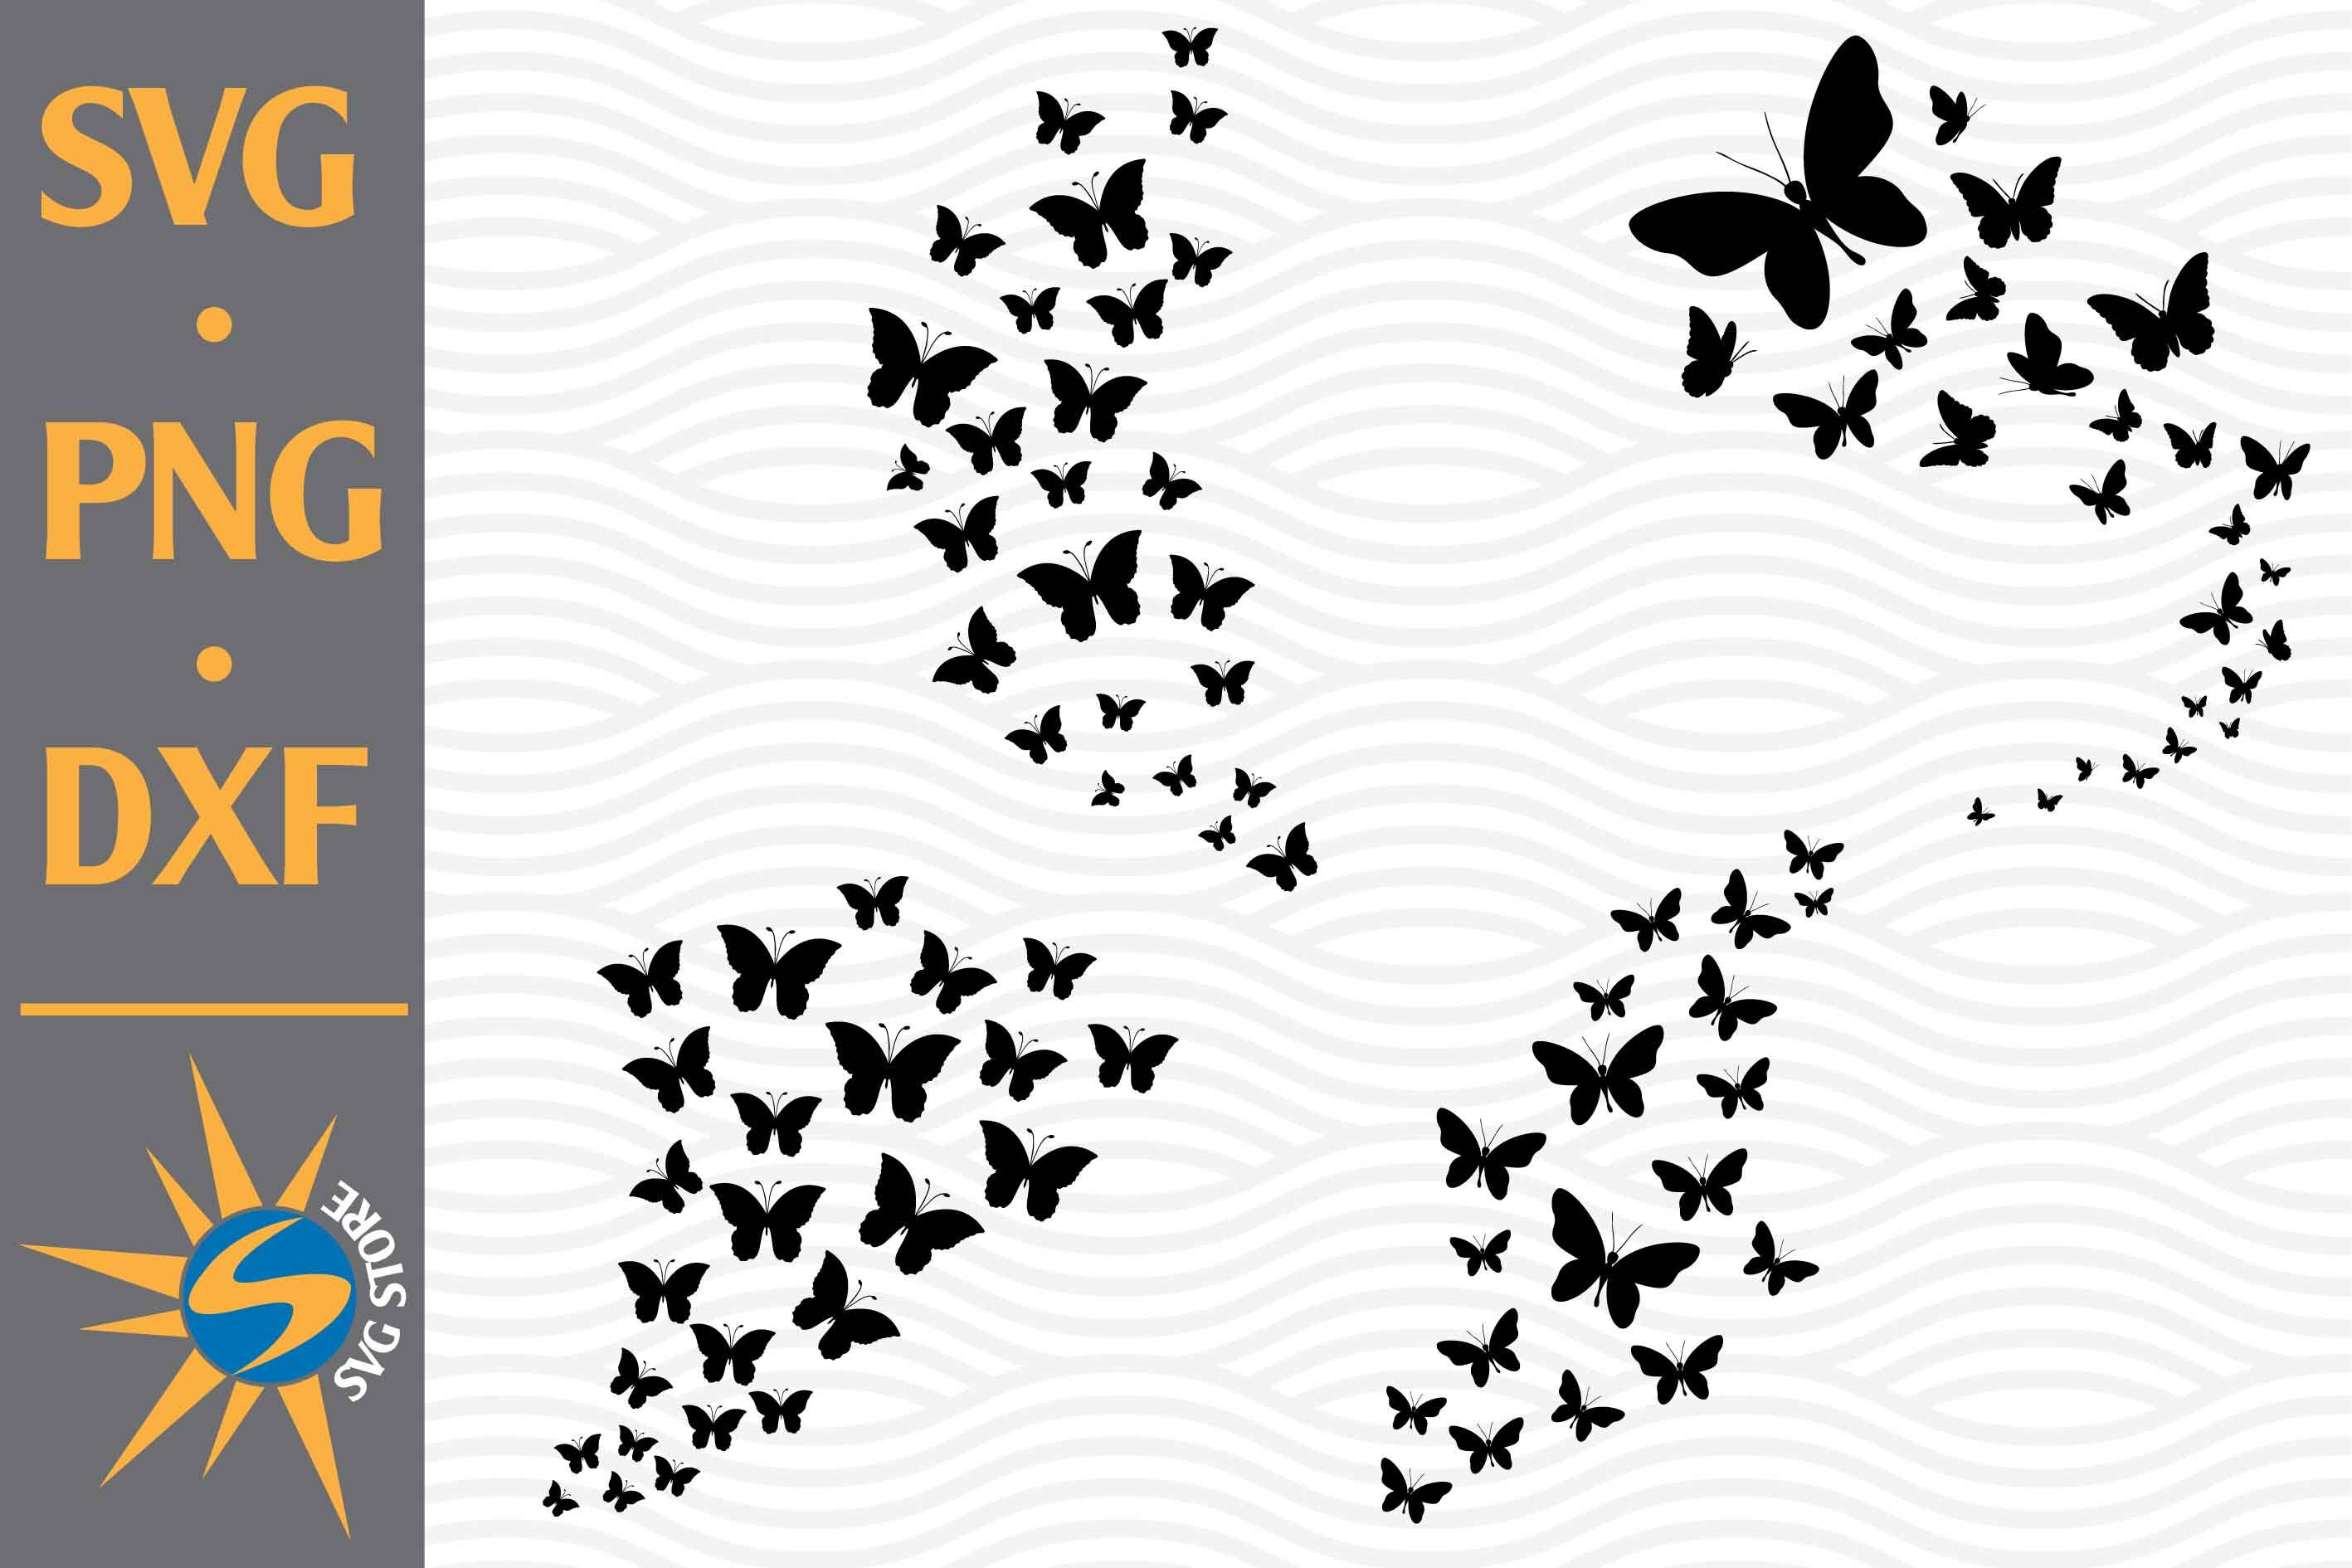 Butterflies Flying SVG, PNG, DXF Digital Files Include By SVGStoreShop